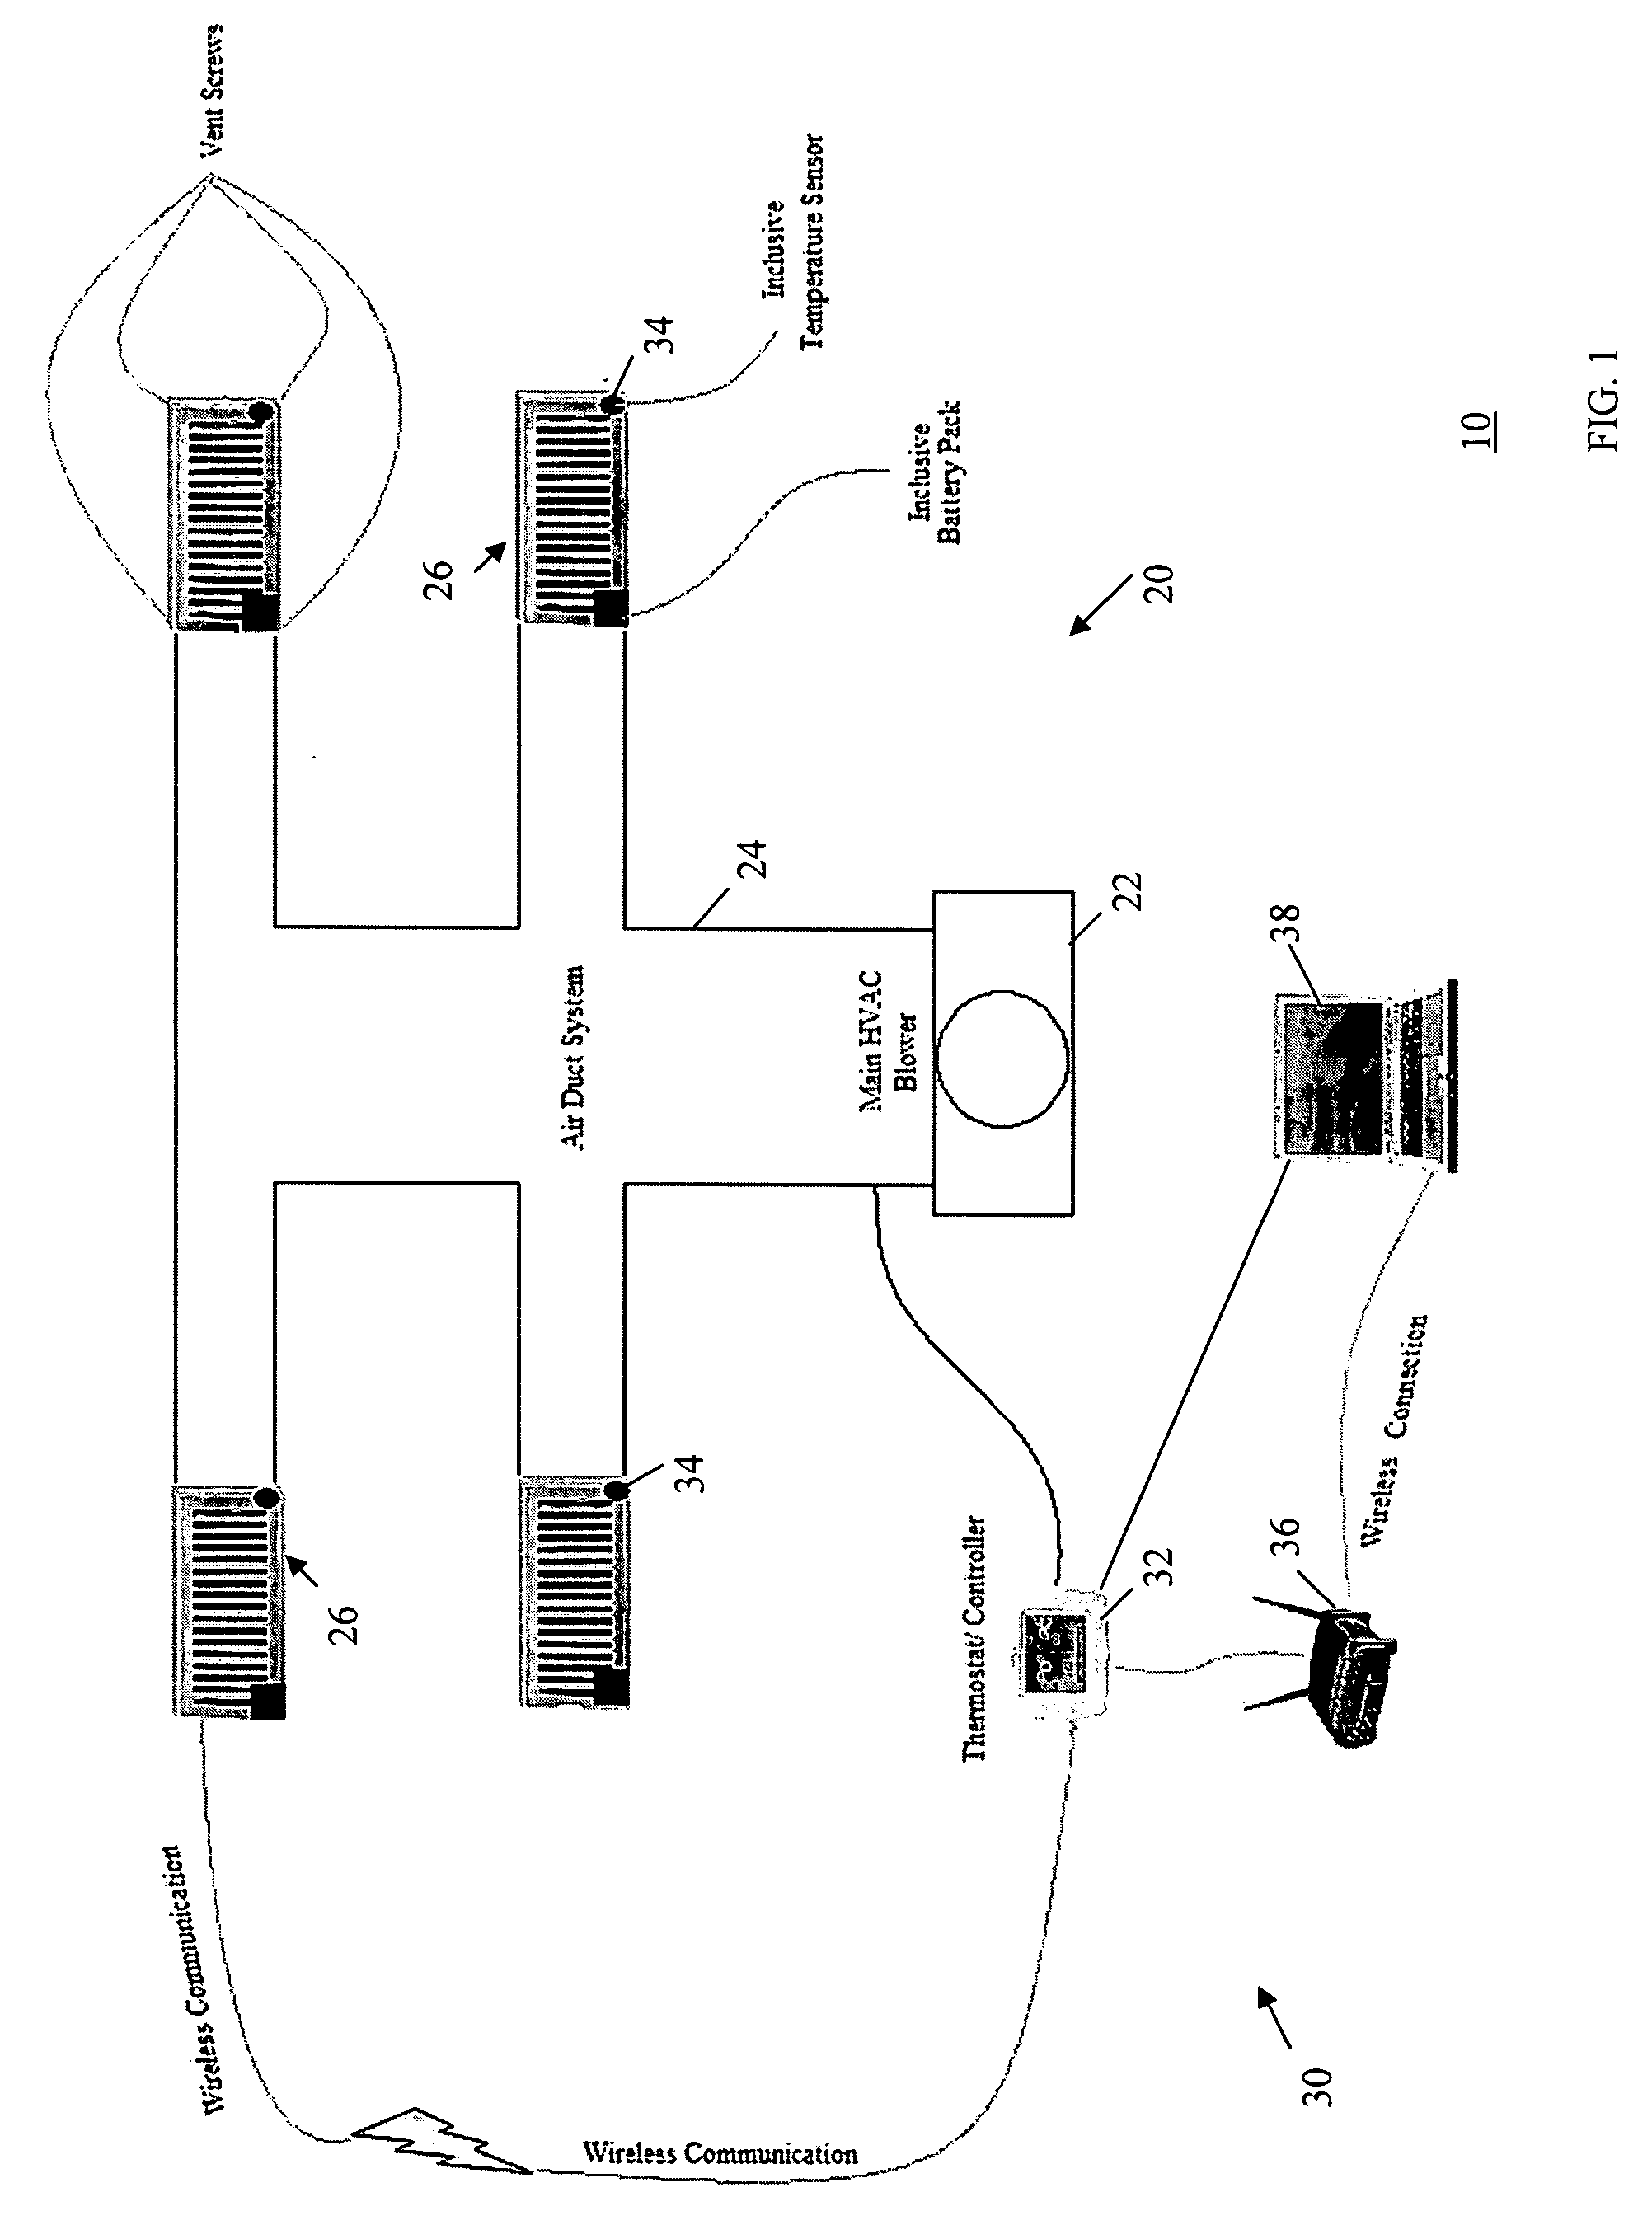 Method and system for controlling heating ventilation and air conditioning (HVAC) units